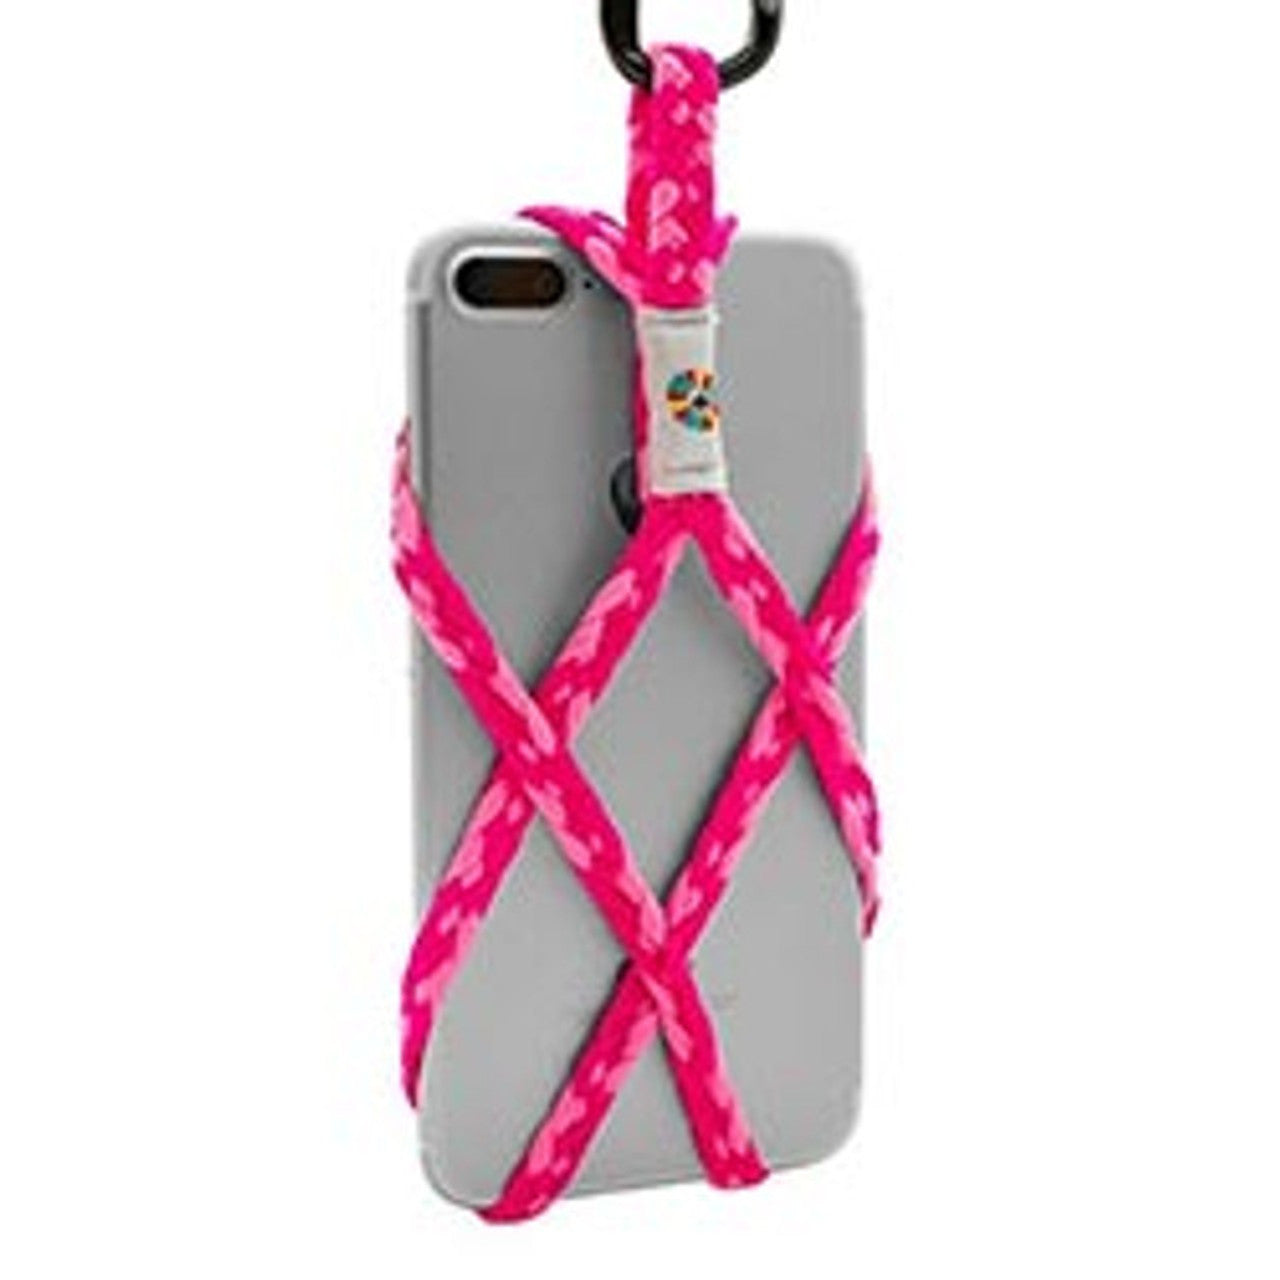 In the Pink Phone Carrier | Universal Phone Lanyard Sling